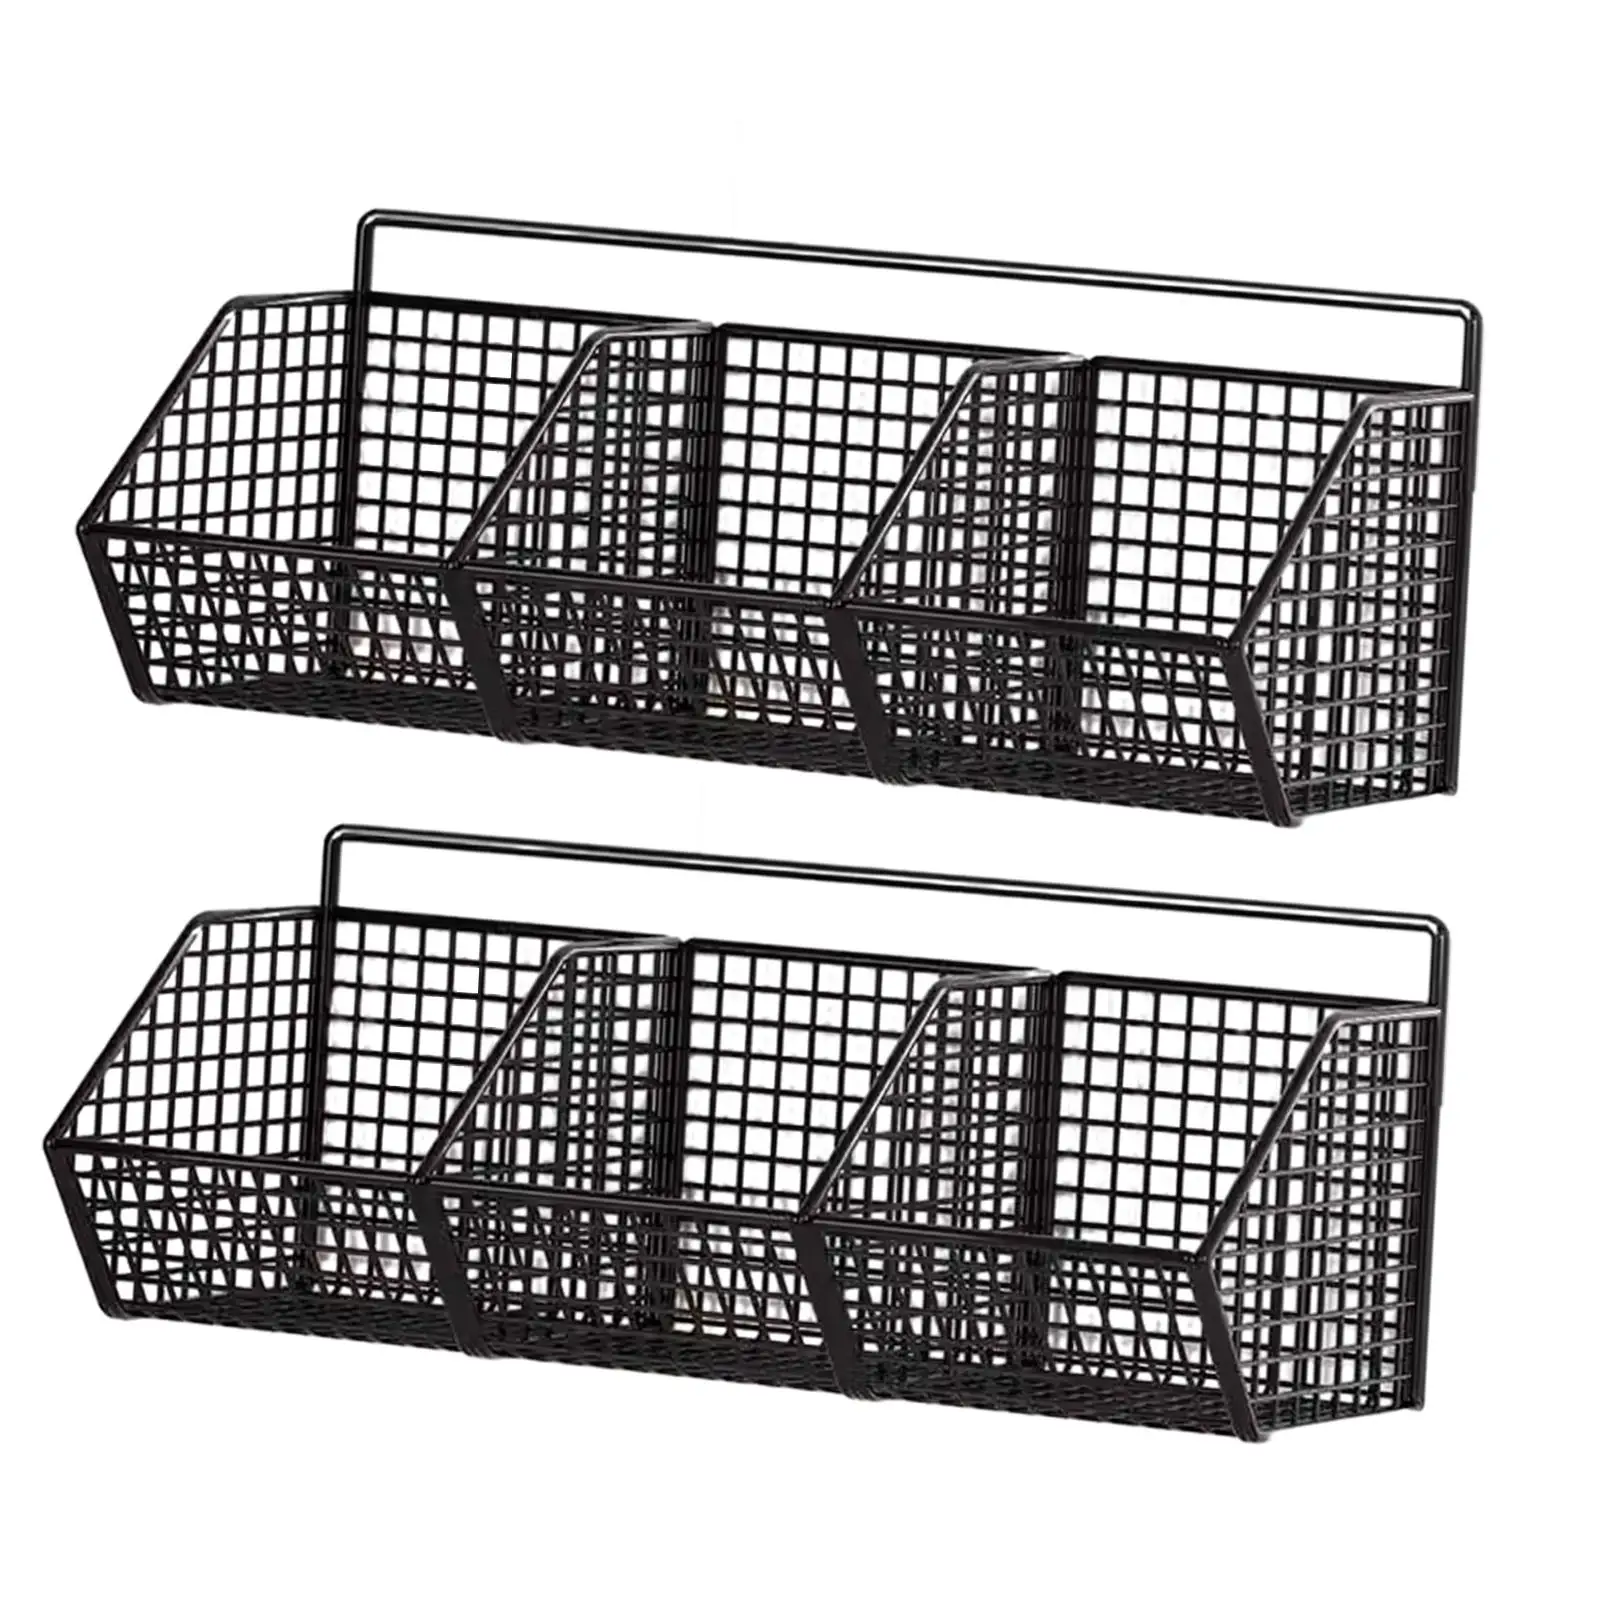 2x Heavy Duty 3 Grids Wall Mounted Shelves Cabinet Storage Basket for Bathroom Fruits Vegetables Snacks Craft Room Kitchen